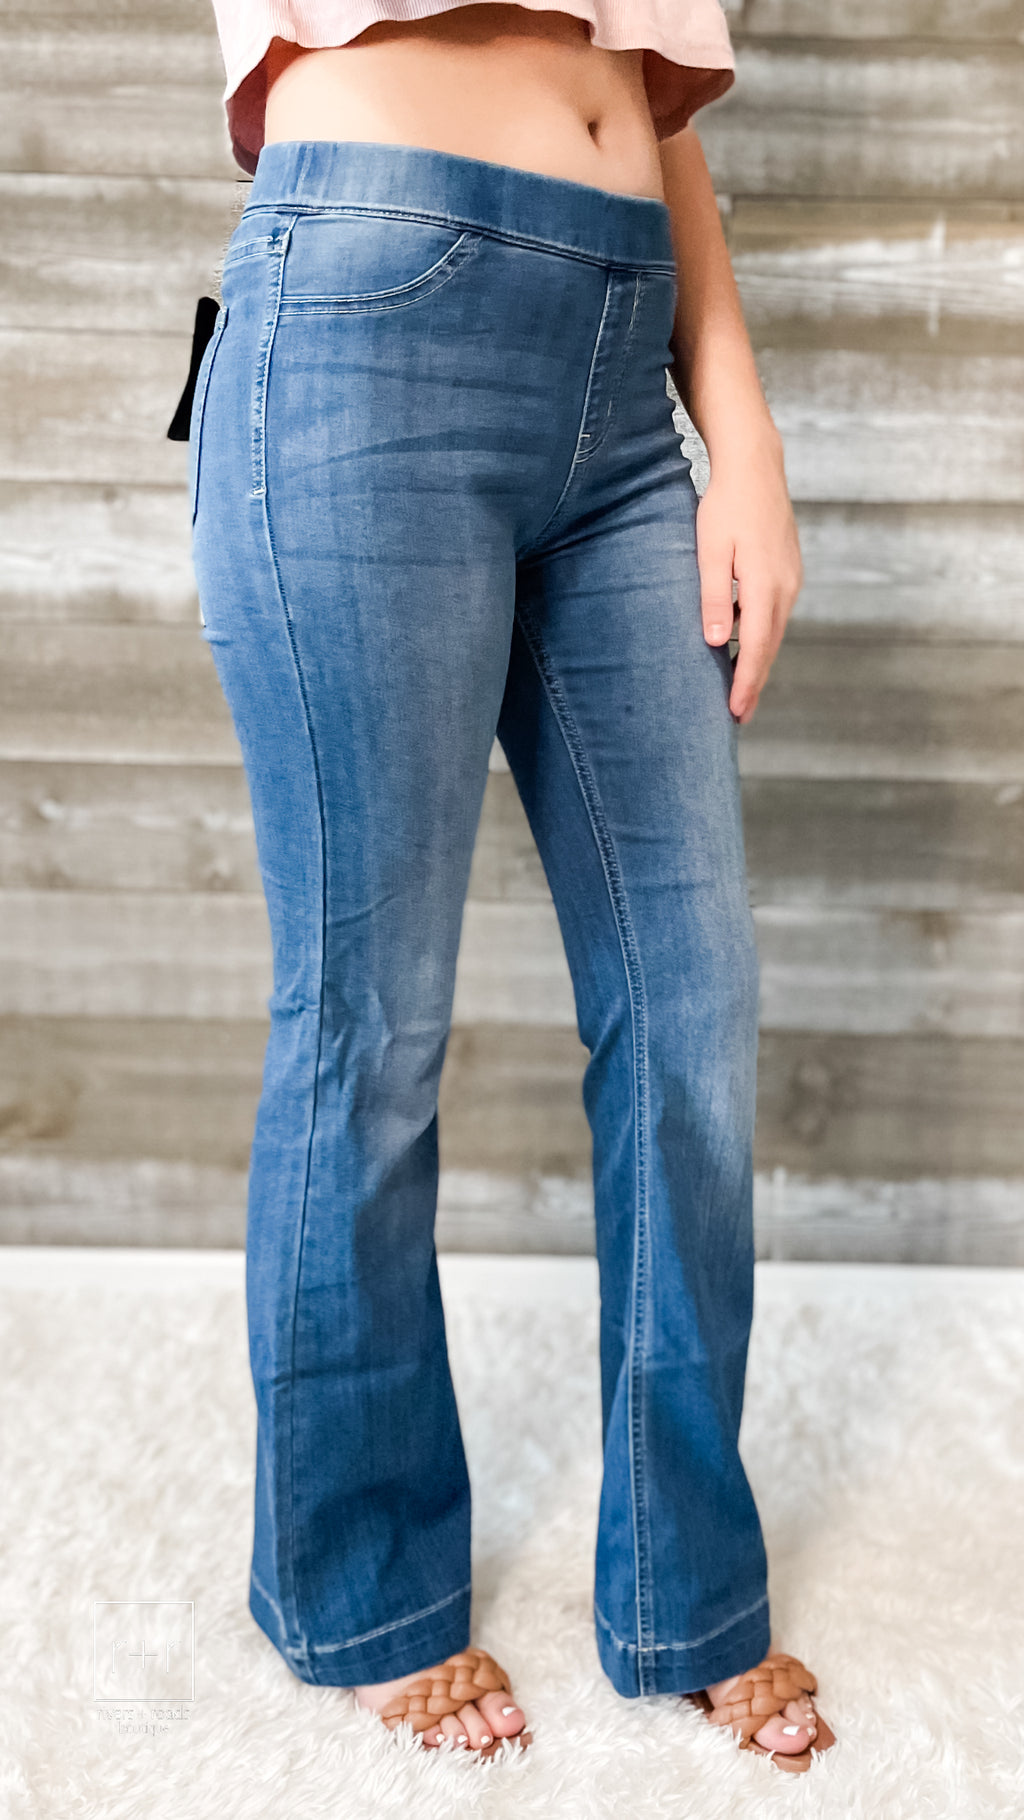 cello jeans mid rise pull on flare jegging AB35324 medium wash